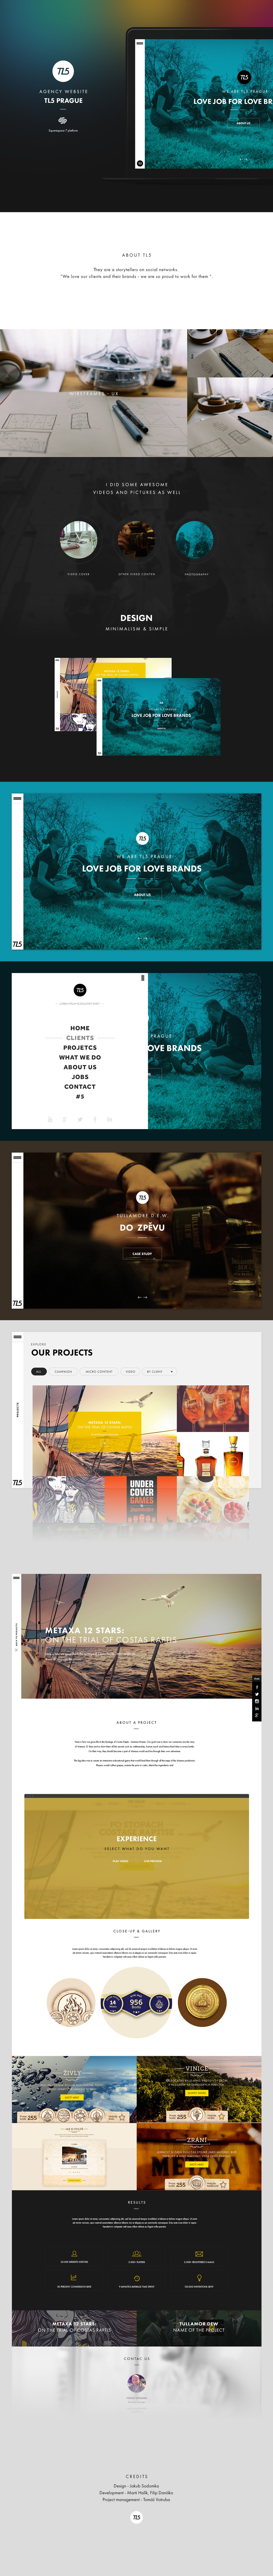 design Website creative Minimalism site simple user experience interaction agency